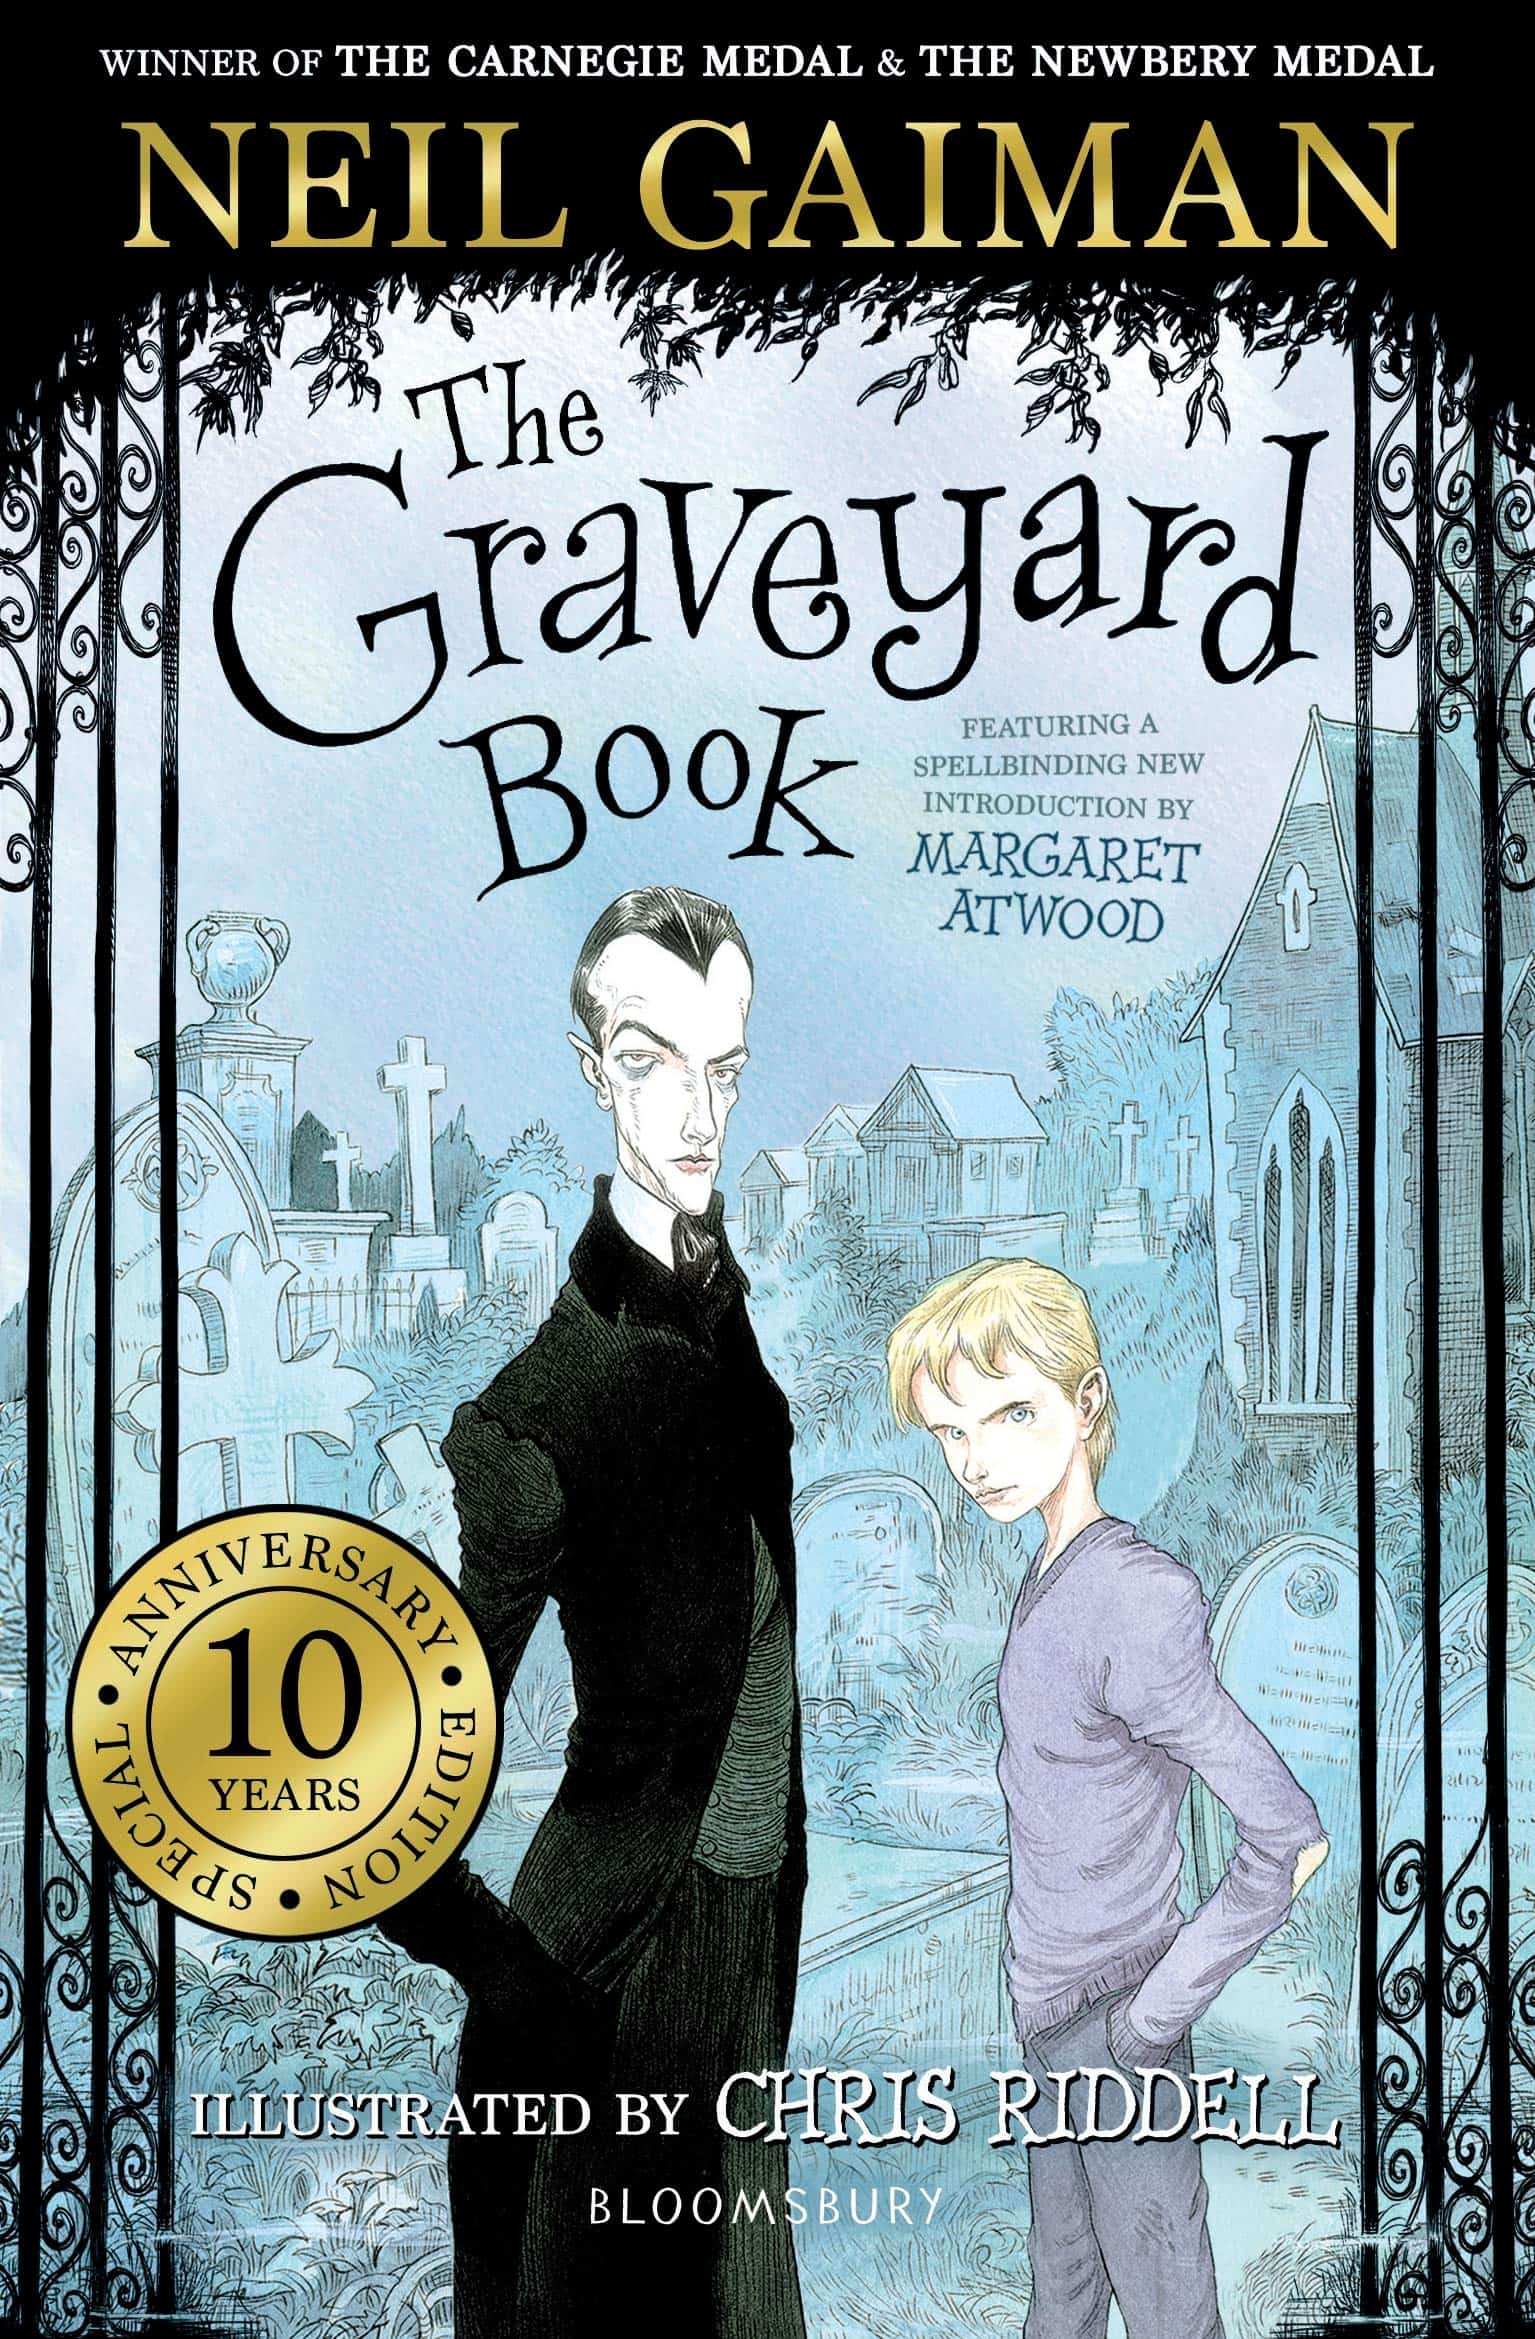 The Graveyard Book jacket cover